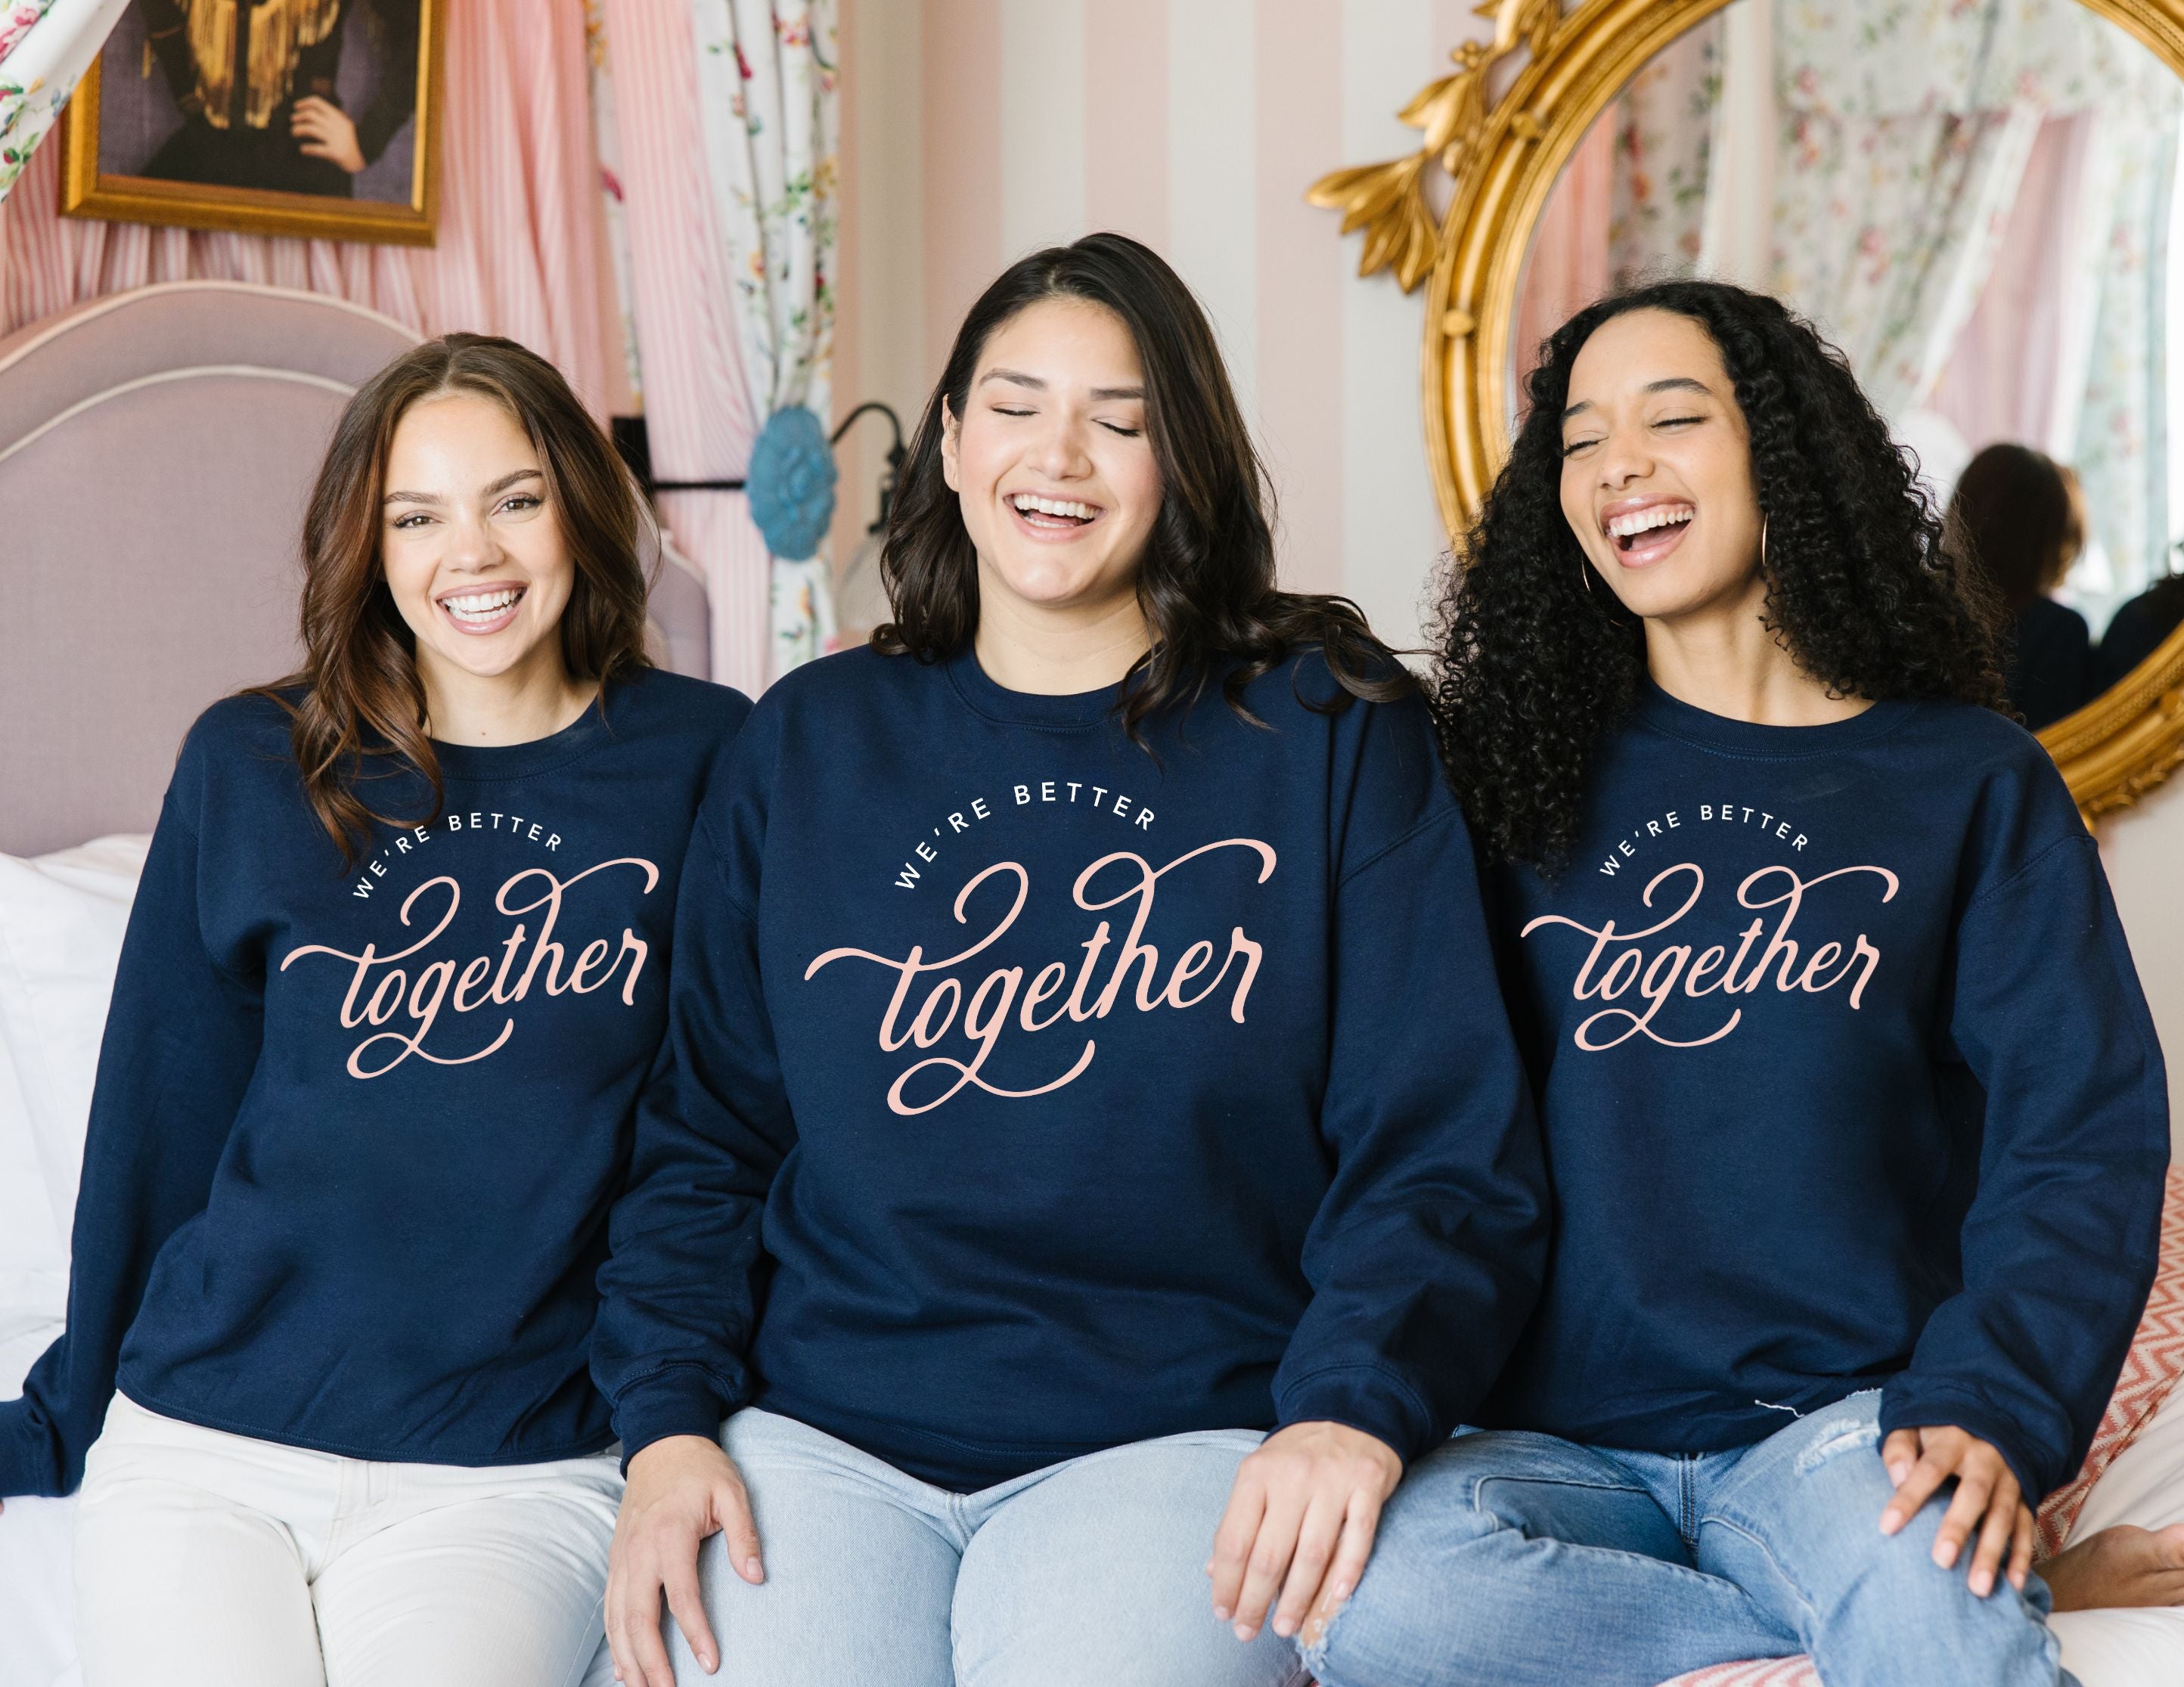 Better Together Sweatshirt for girls night or travel day